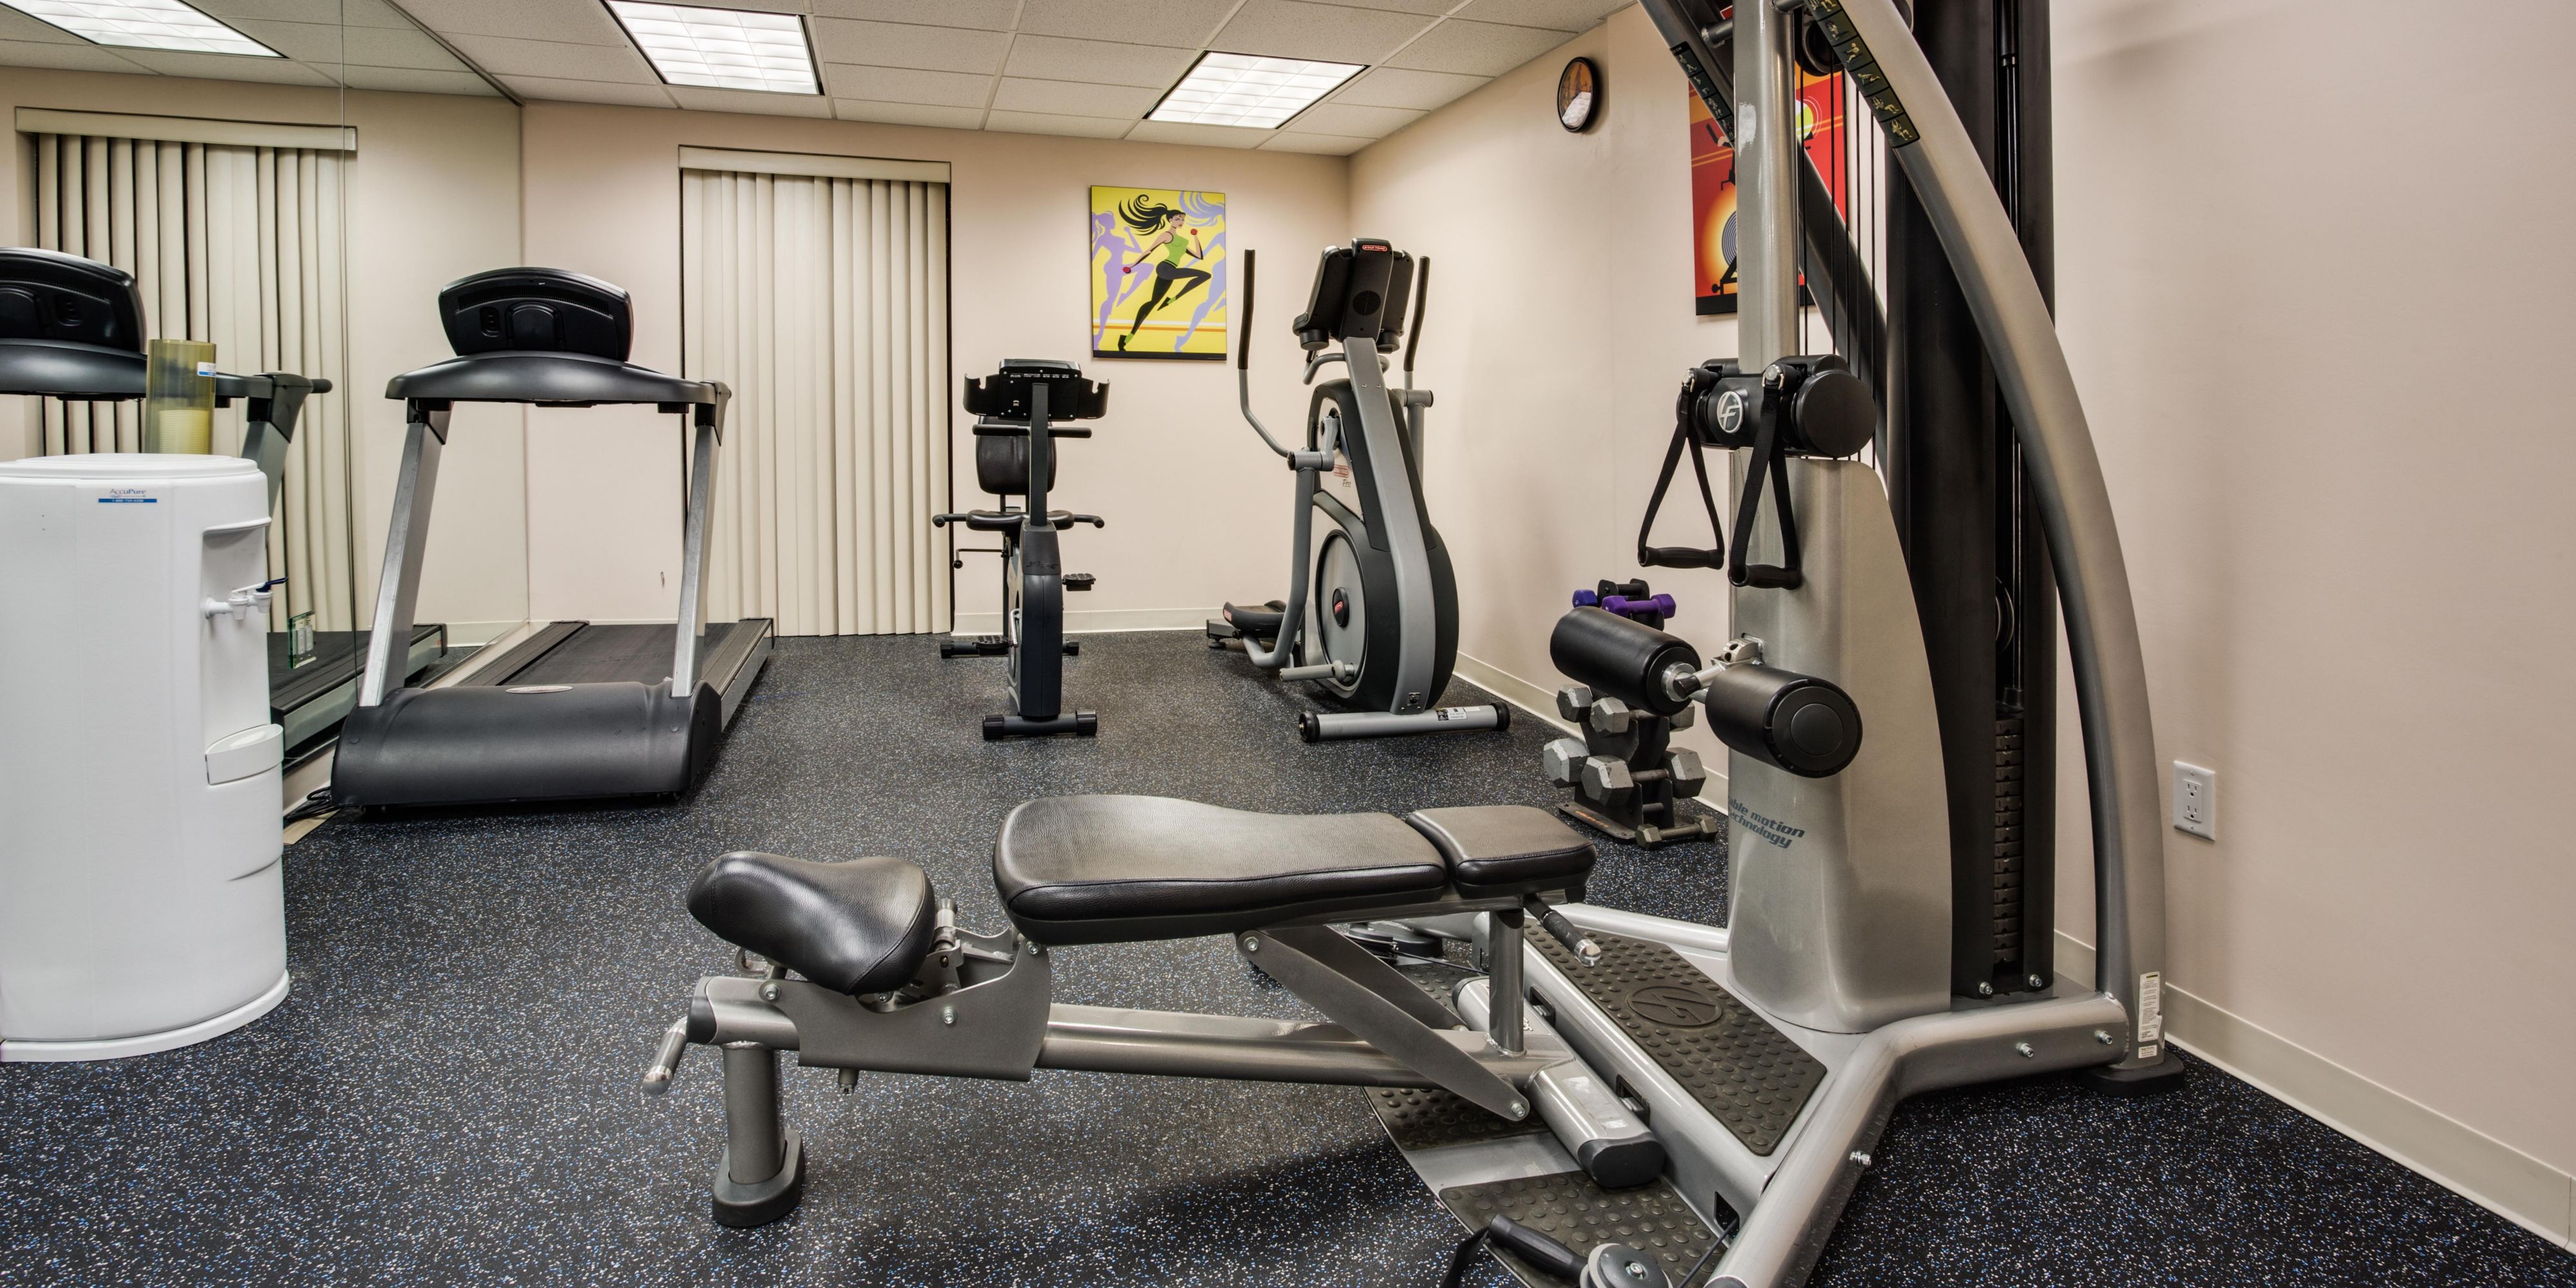 Complimentary Fitness Center features an elliptical machine, stationary bike, treadmill, and universal weight machine. Please reserve your time slot at our Front Desk. One person and/or party reservation up to four people maximum. Hours of Operation: 6:00 AM to 9:00 PM daily.